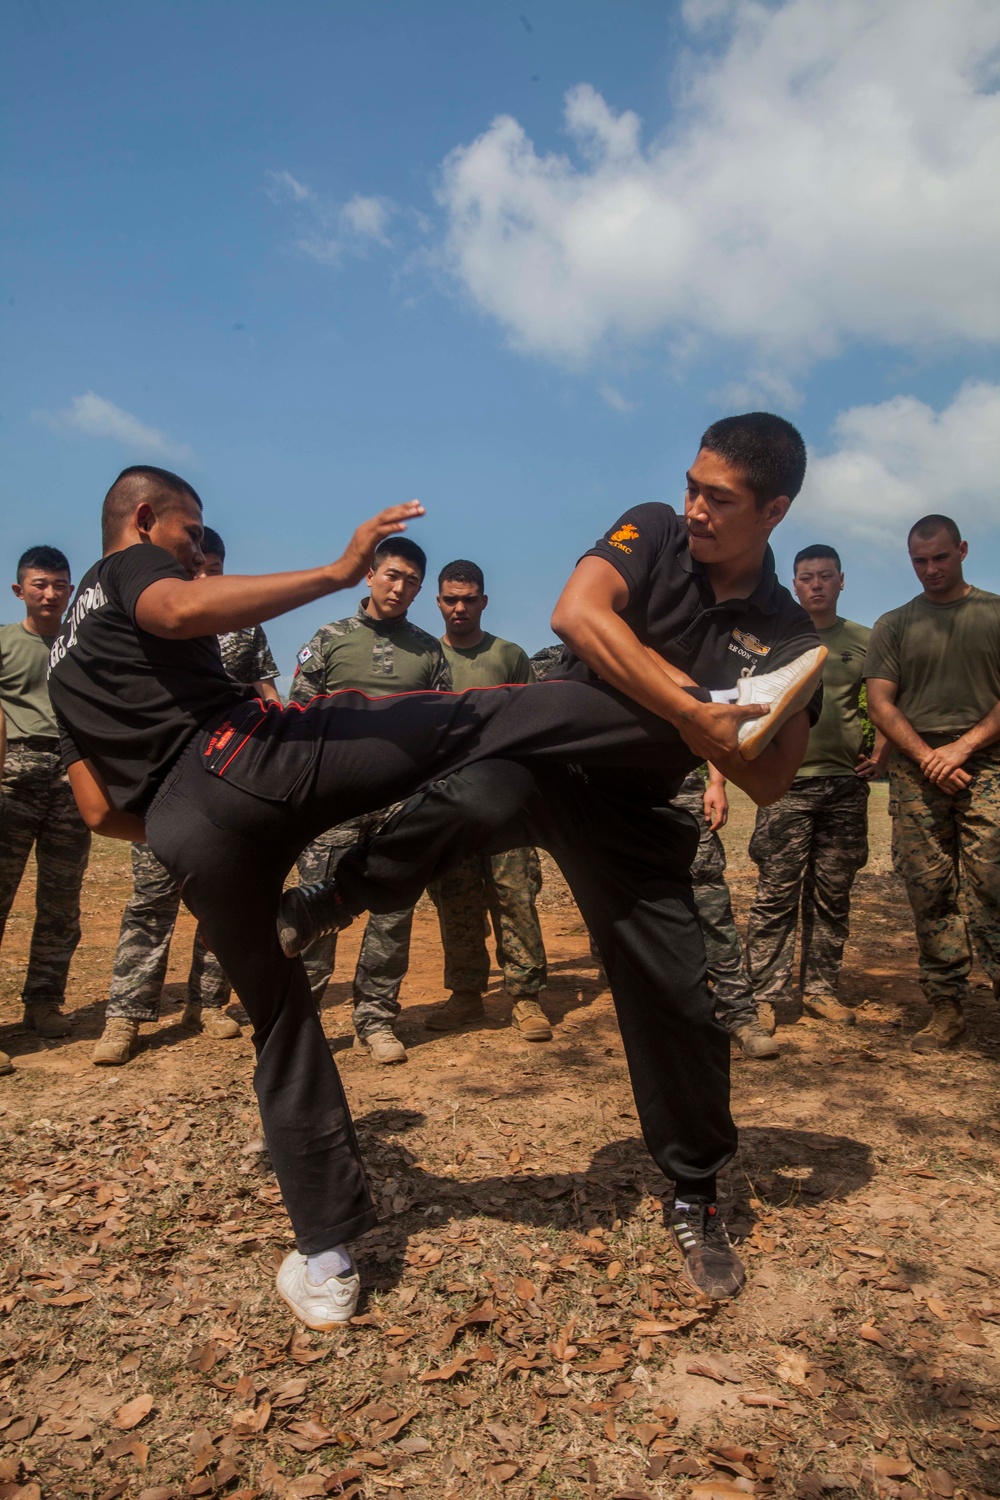 Learning Muay Thai with Royal Thai Marines